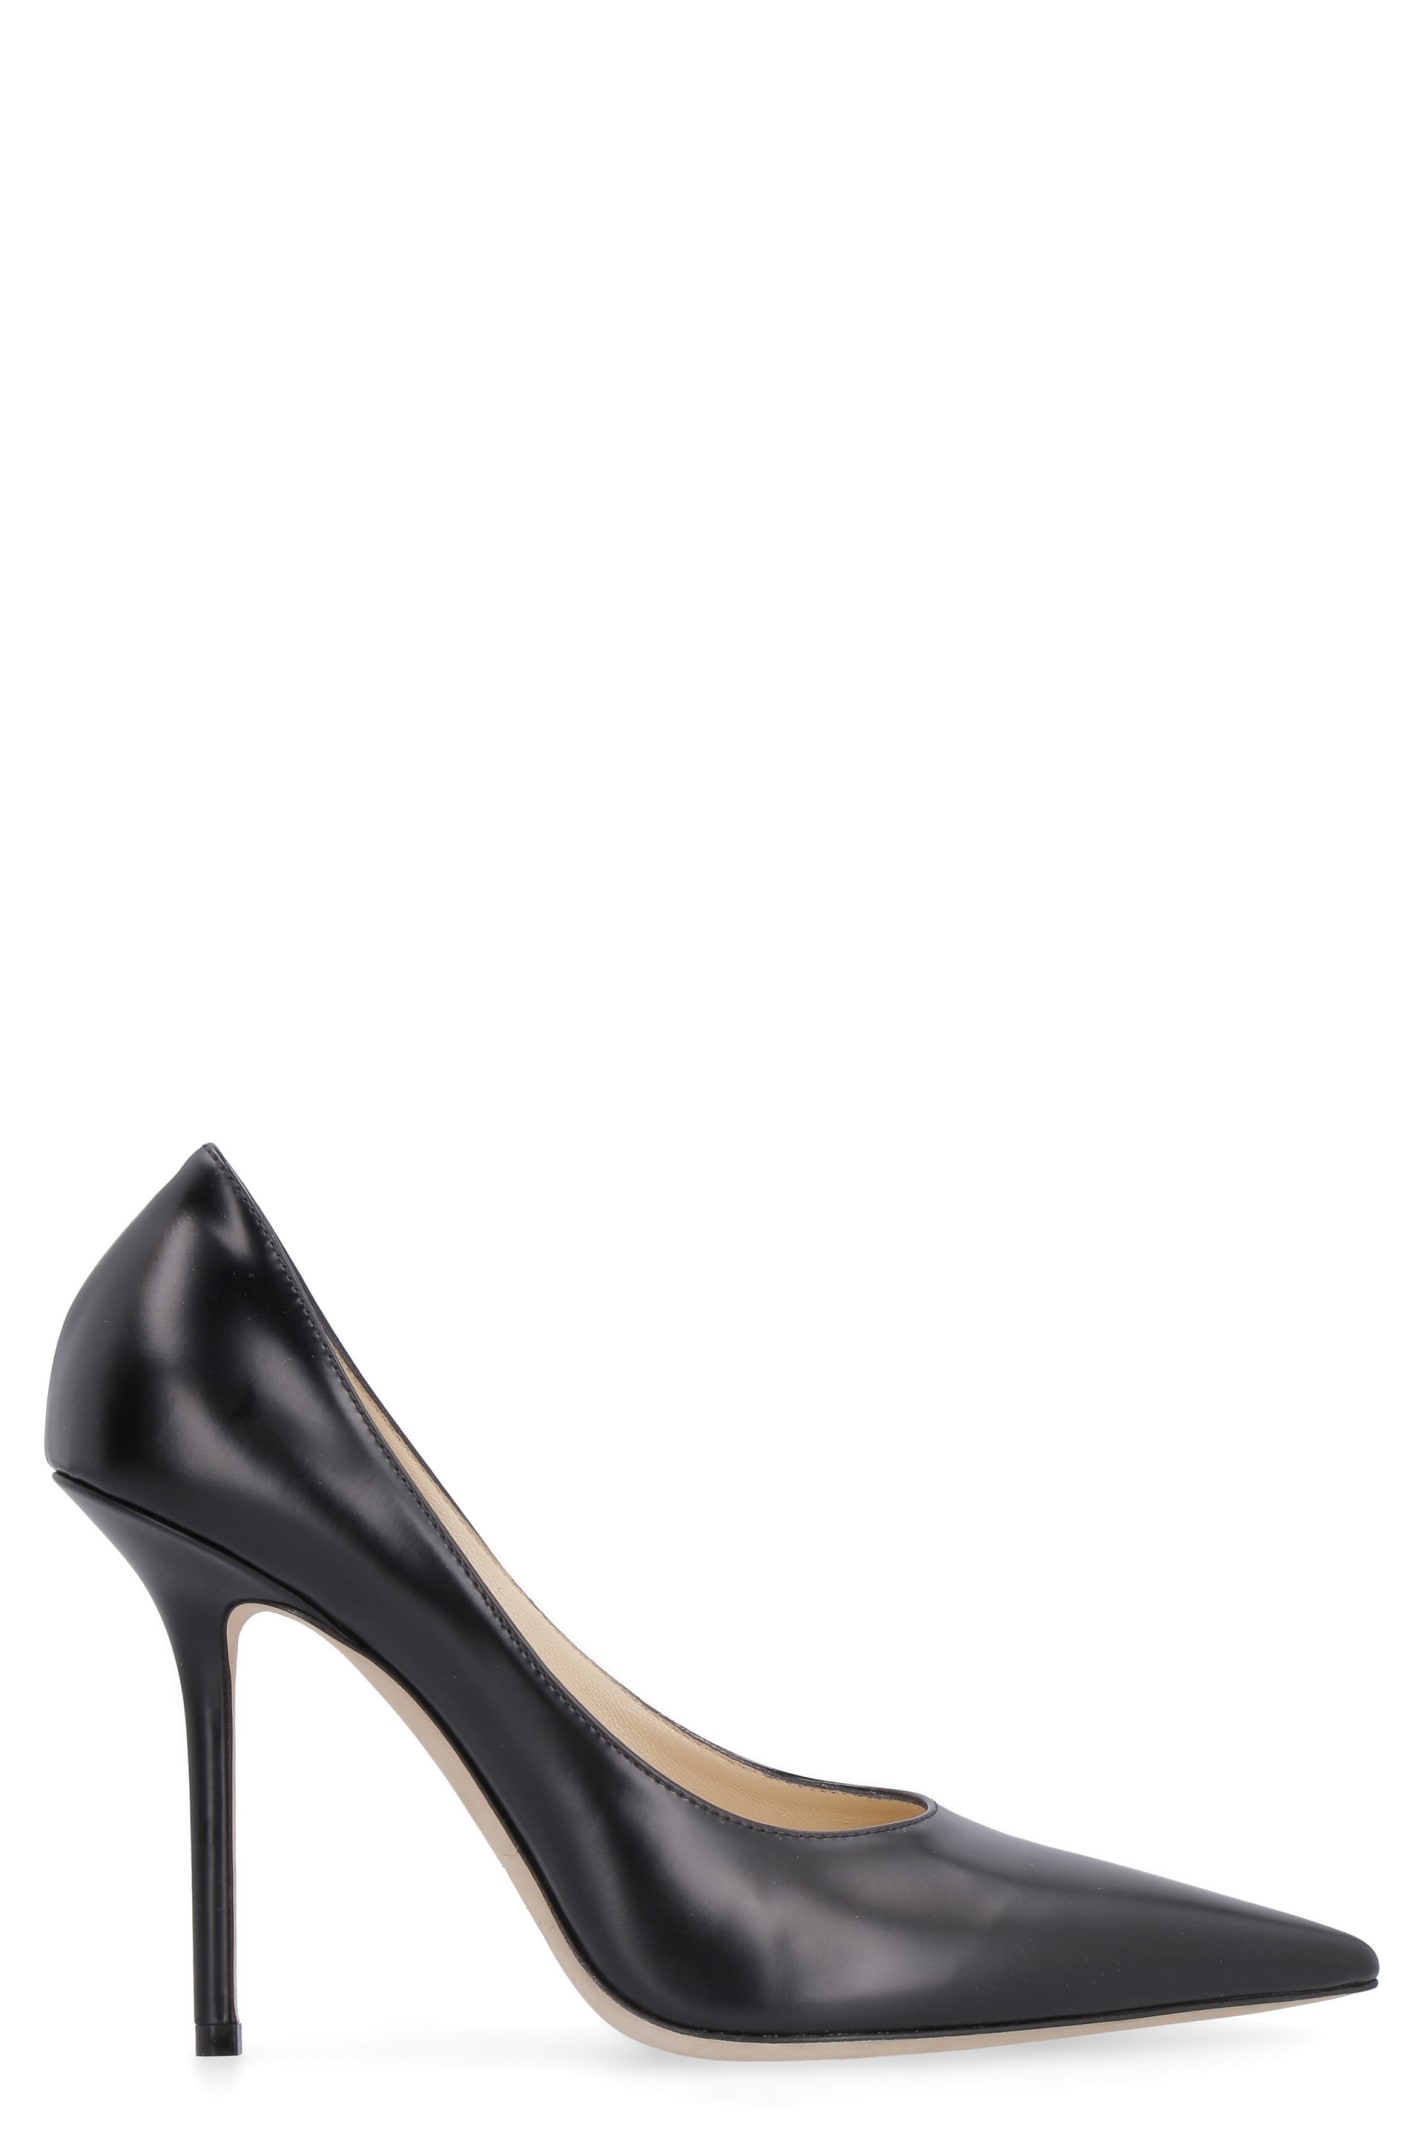 Jimmy Choo Ava Leather Pointy-toe Pumps